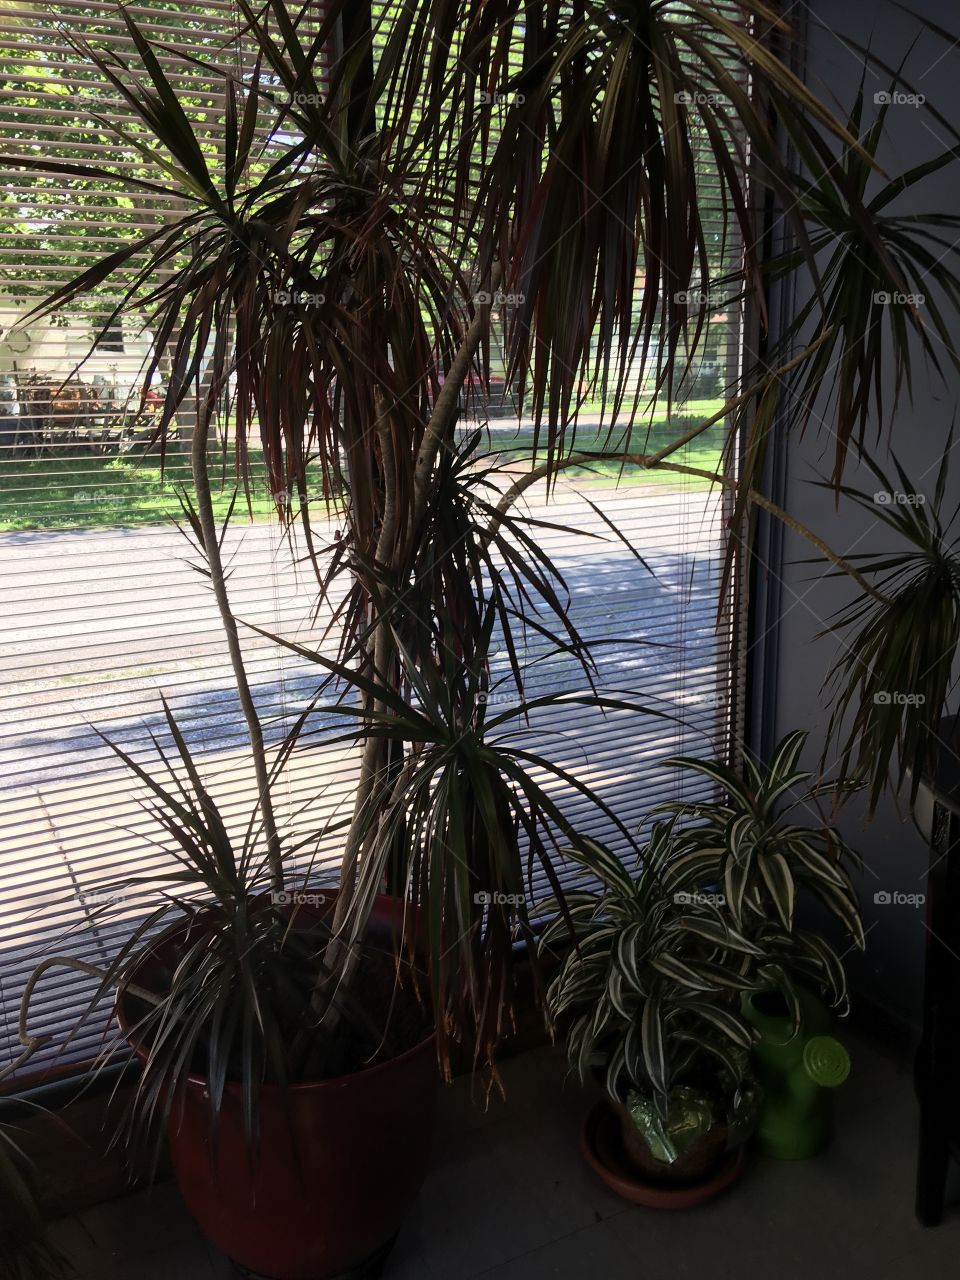 Some plants at the good ole senior center placed by the window for some sunlight.